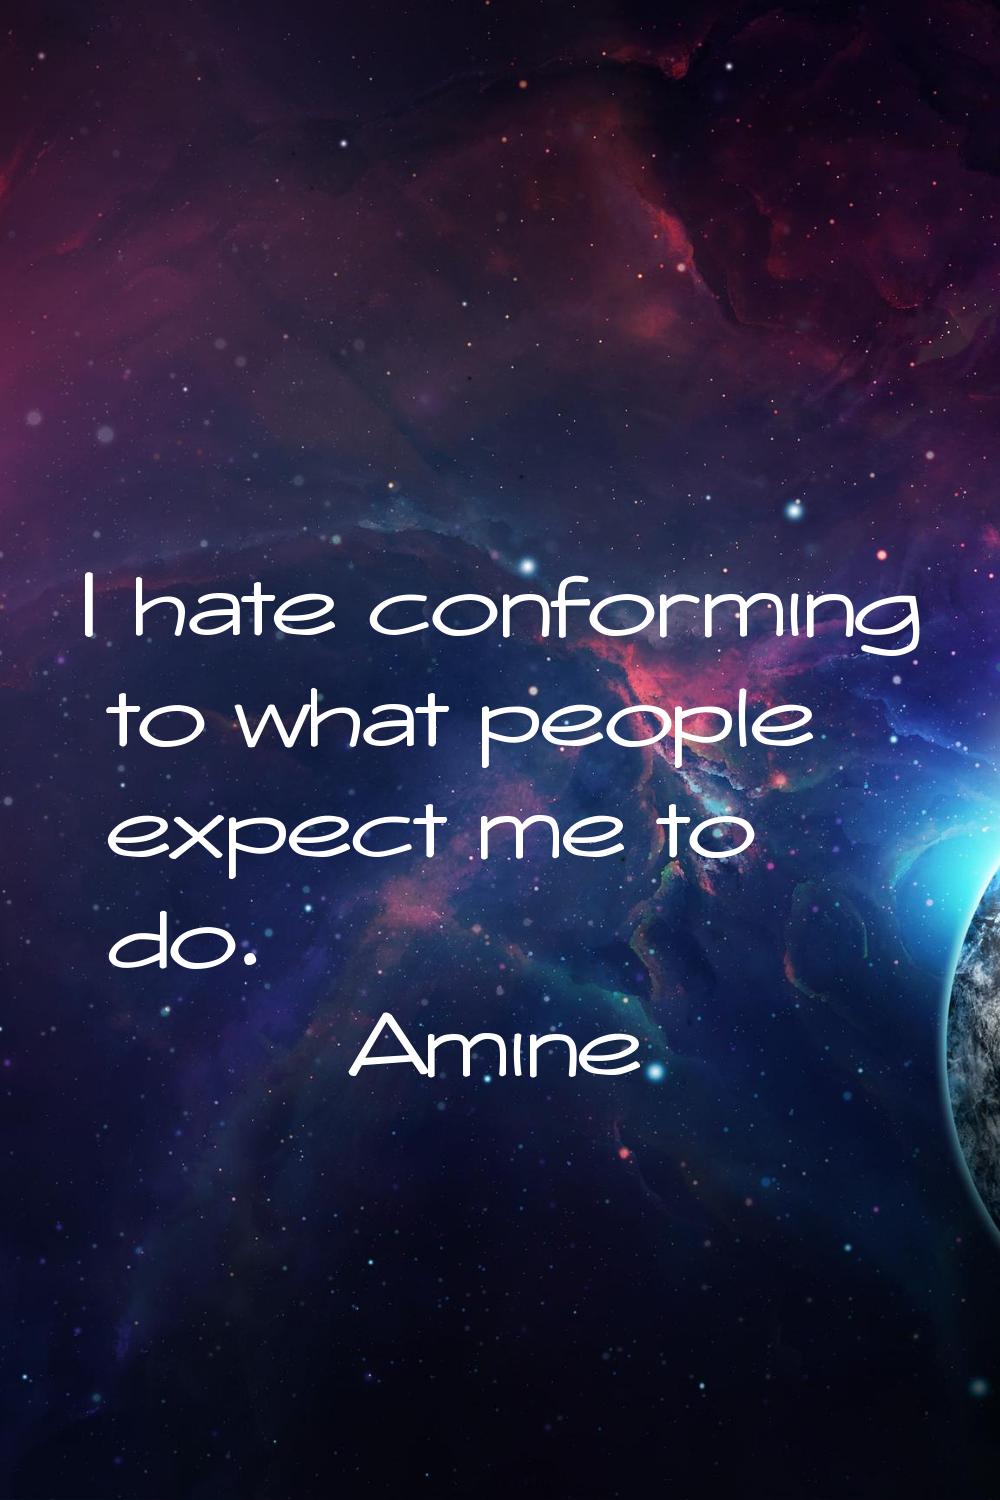 I hate conforming to what people expect me to do.